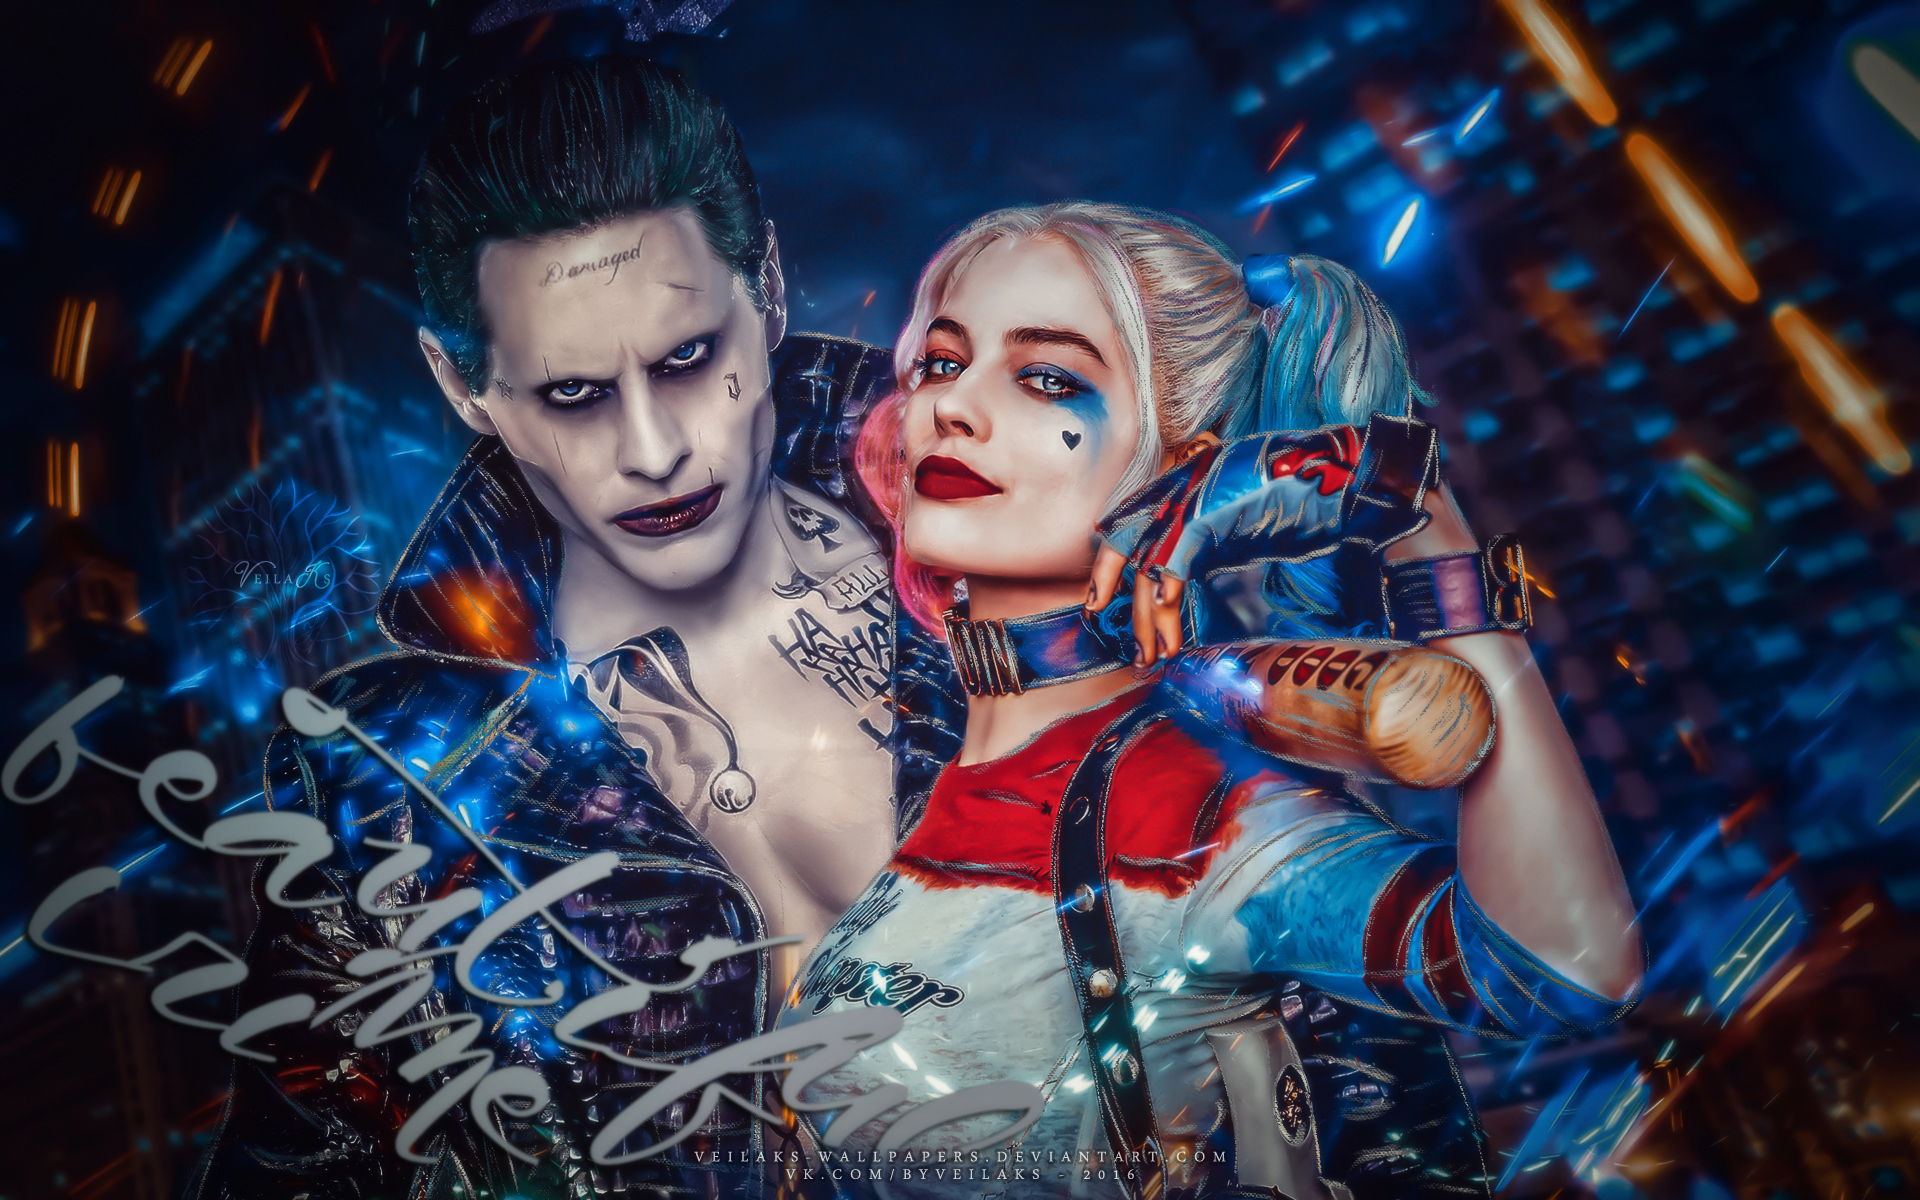 joker, movie, margot robbie, harley quinn, suicide squad, jared leto, two toned hair 2160p